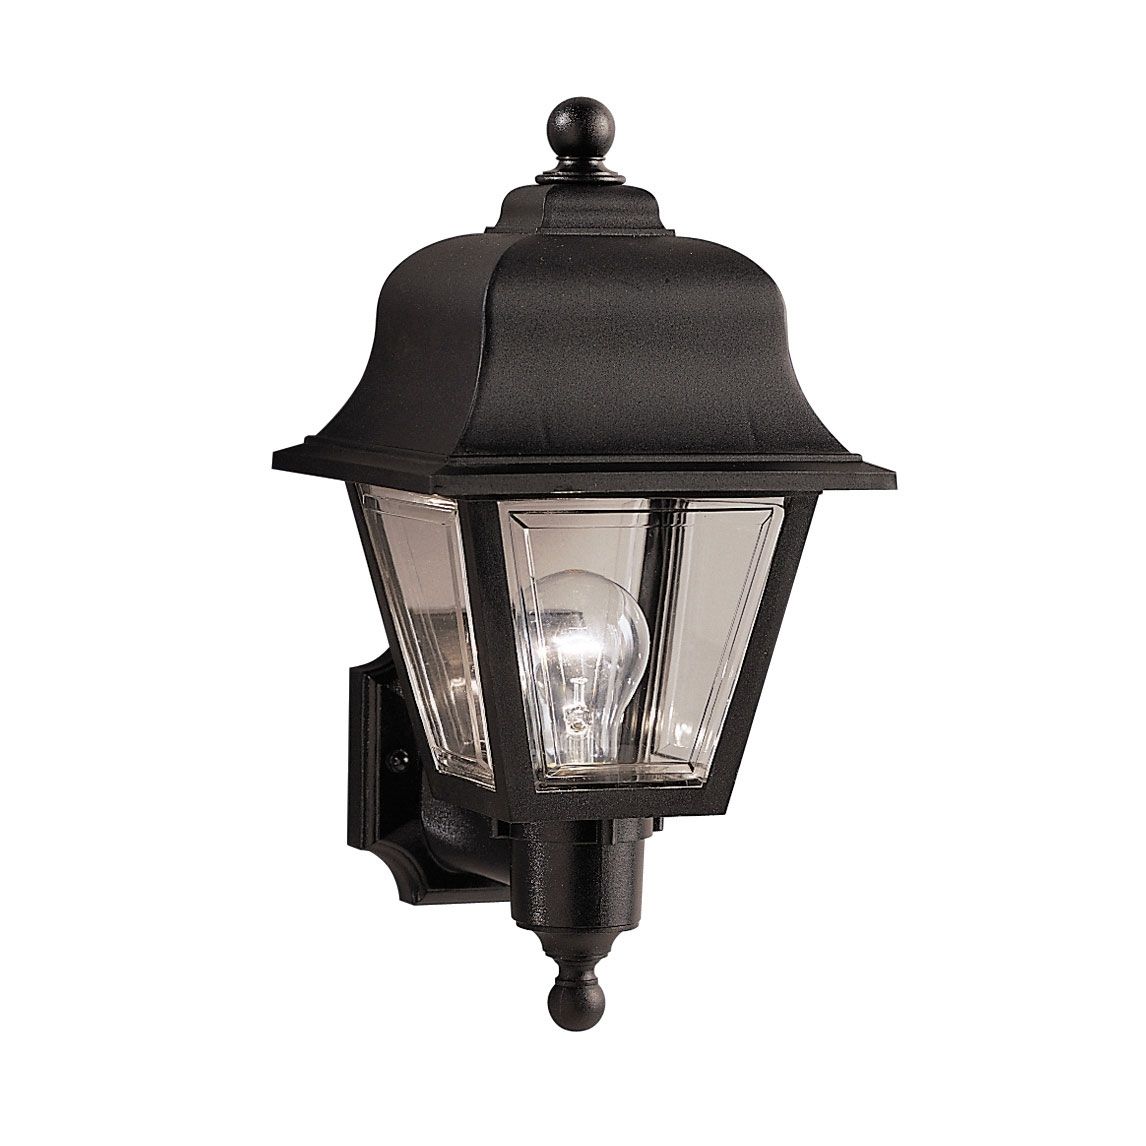 Light : Outdoor Led Wall Lighting Fixtures Mount Lights Outside In Hanging Outdoor Security Lights (View 4 of 15)